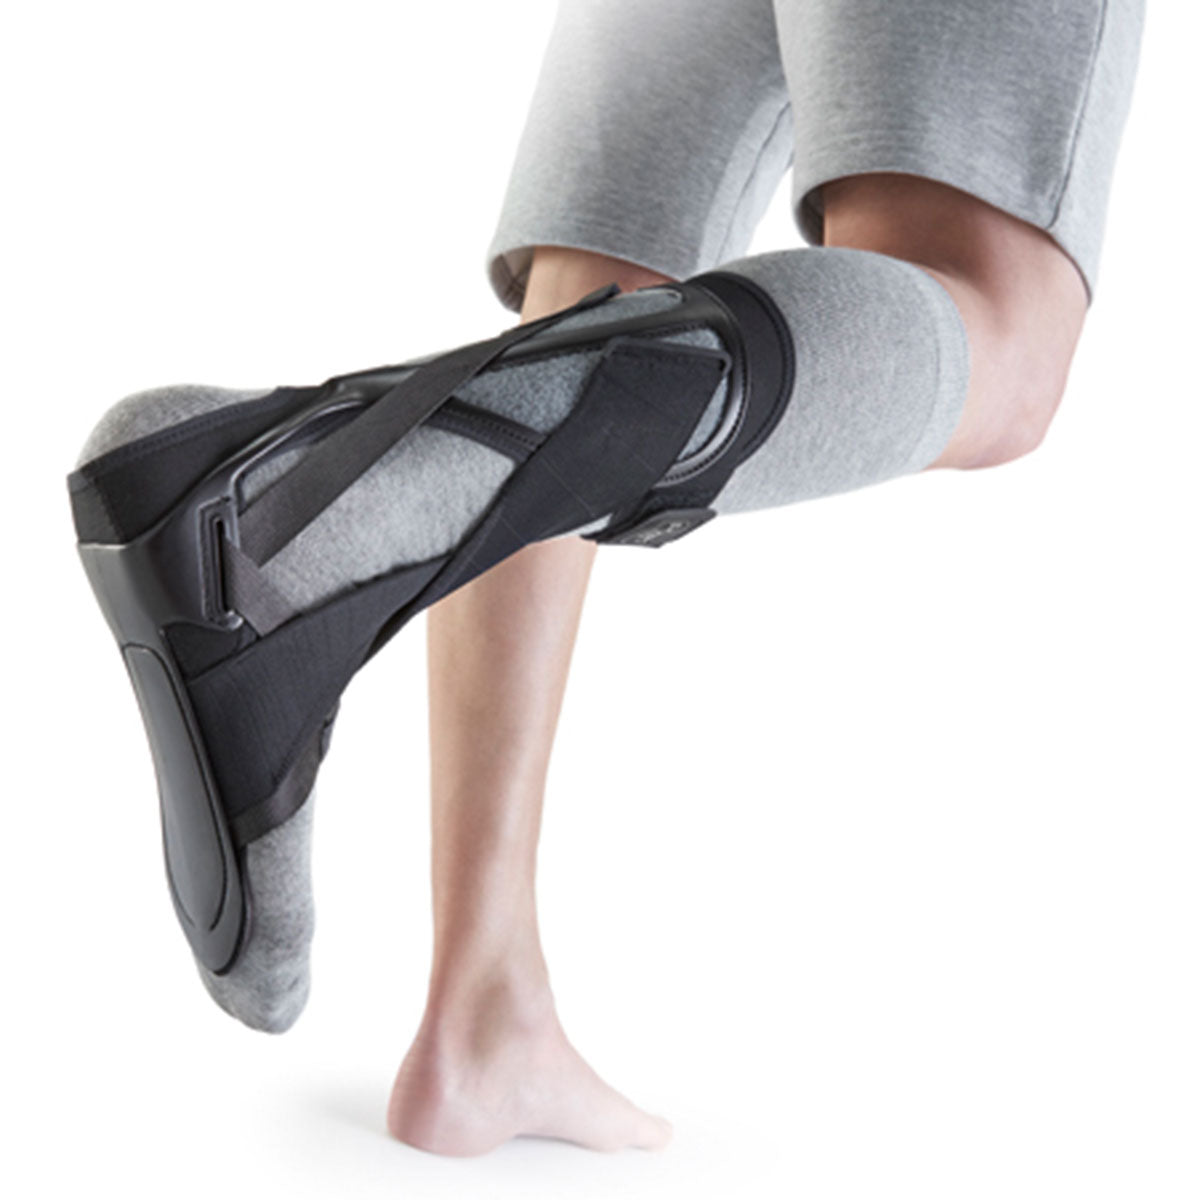 Foot & Ankle Braces / Soft to Rigid supports and splints At Therapy